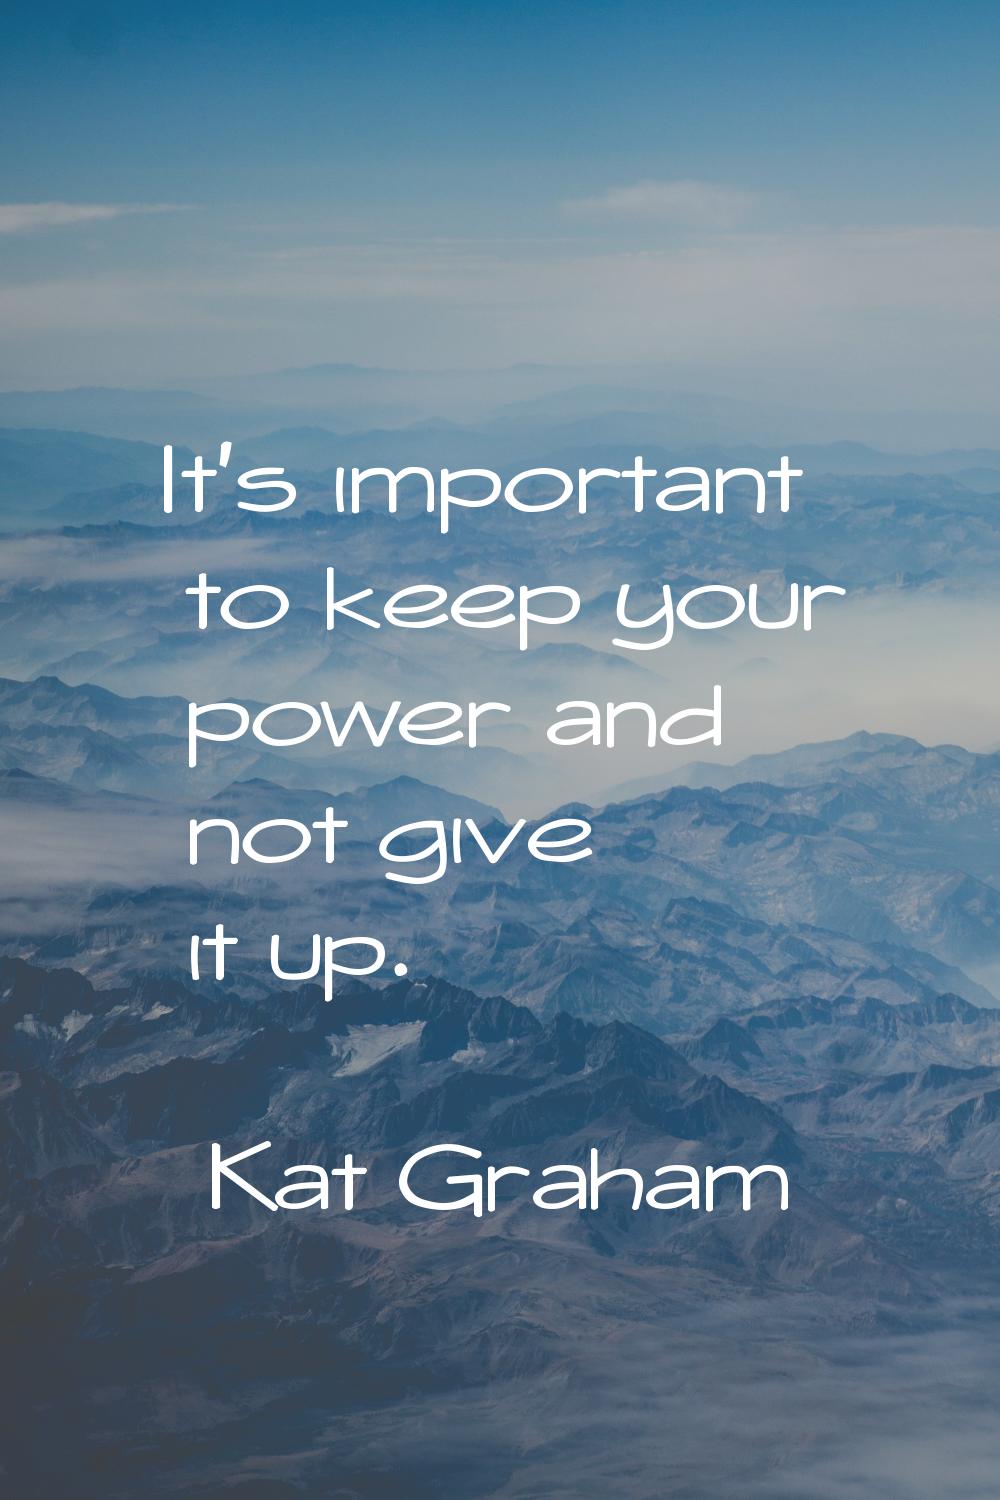 It's important to keep your power and not give it up.